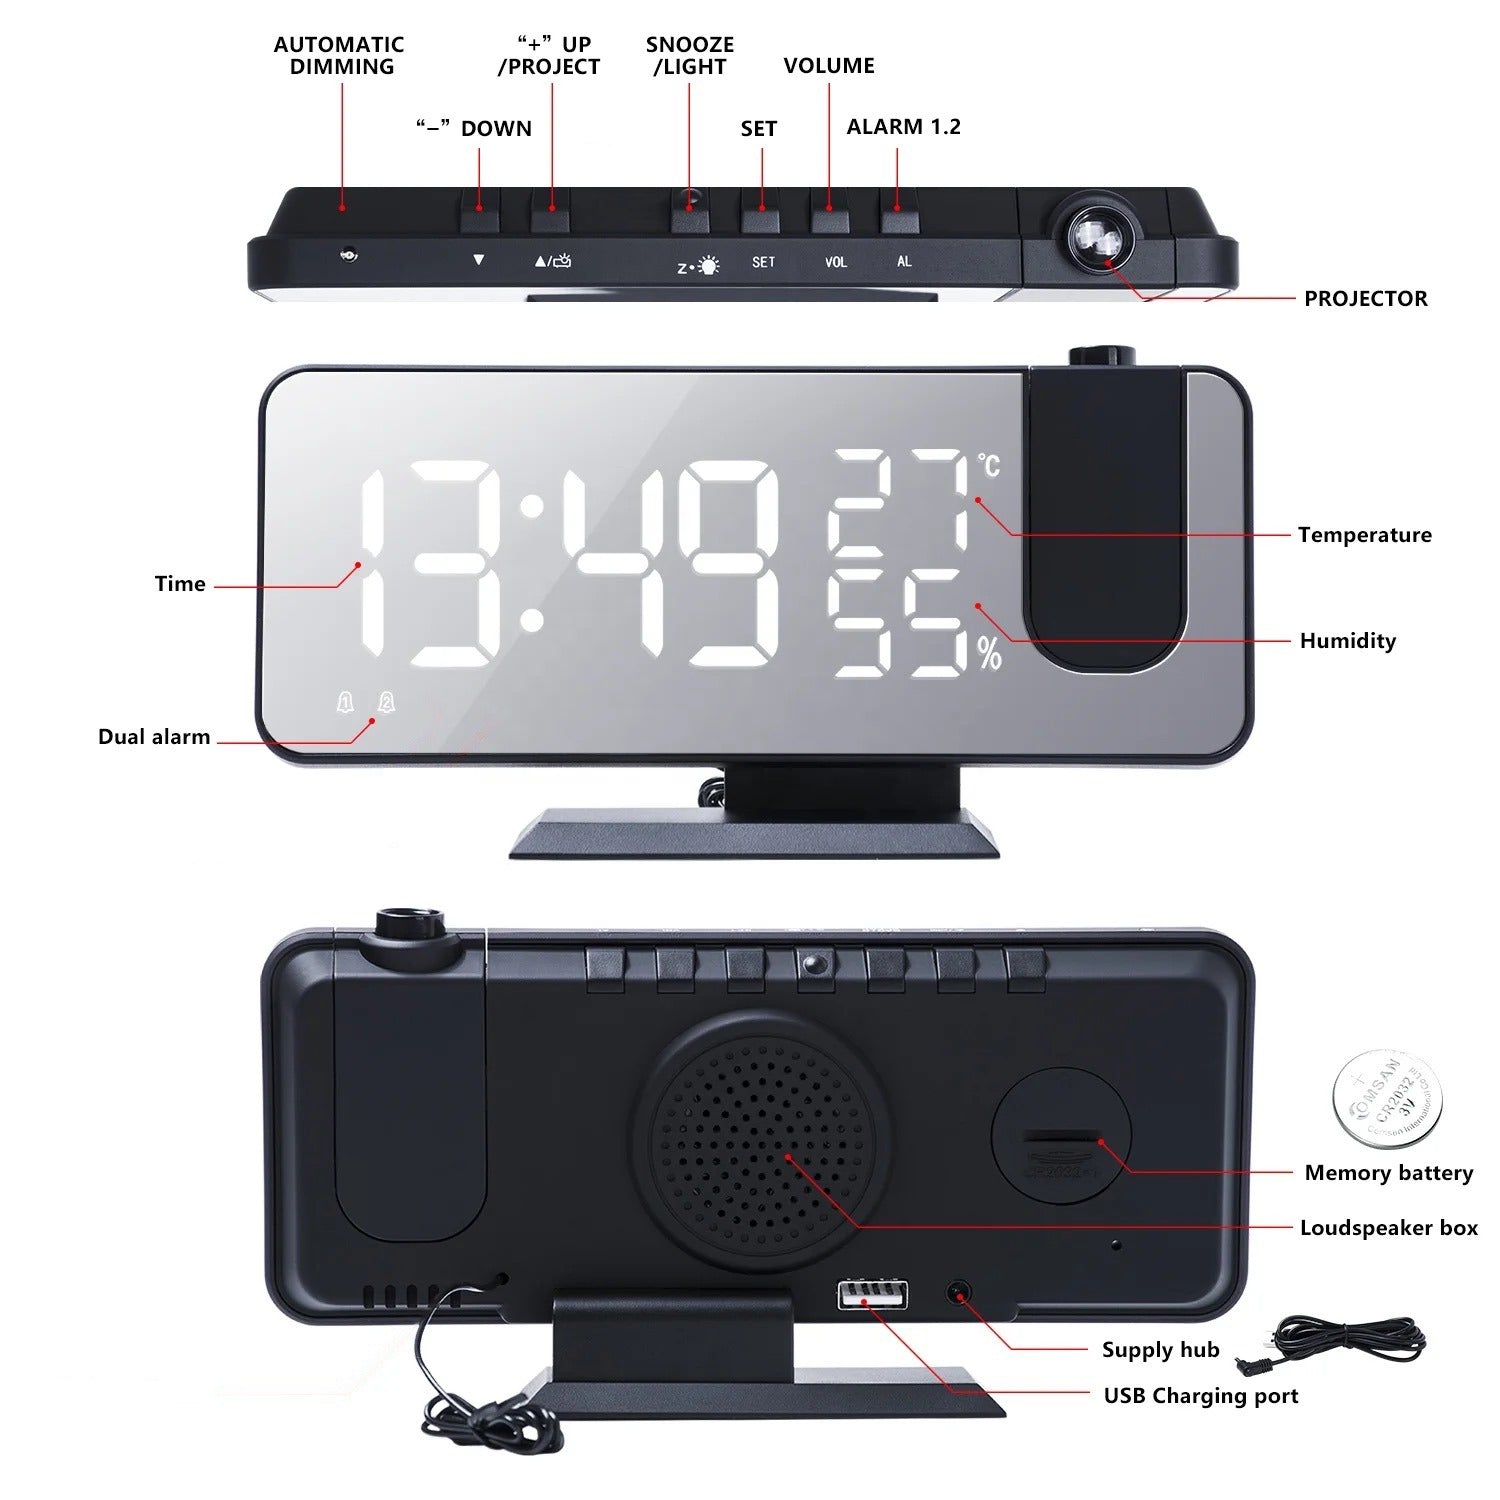 LED Projection Alarm Clock - Digital Display, Humidity, and Mirror Surface